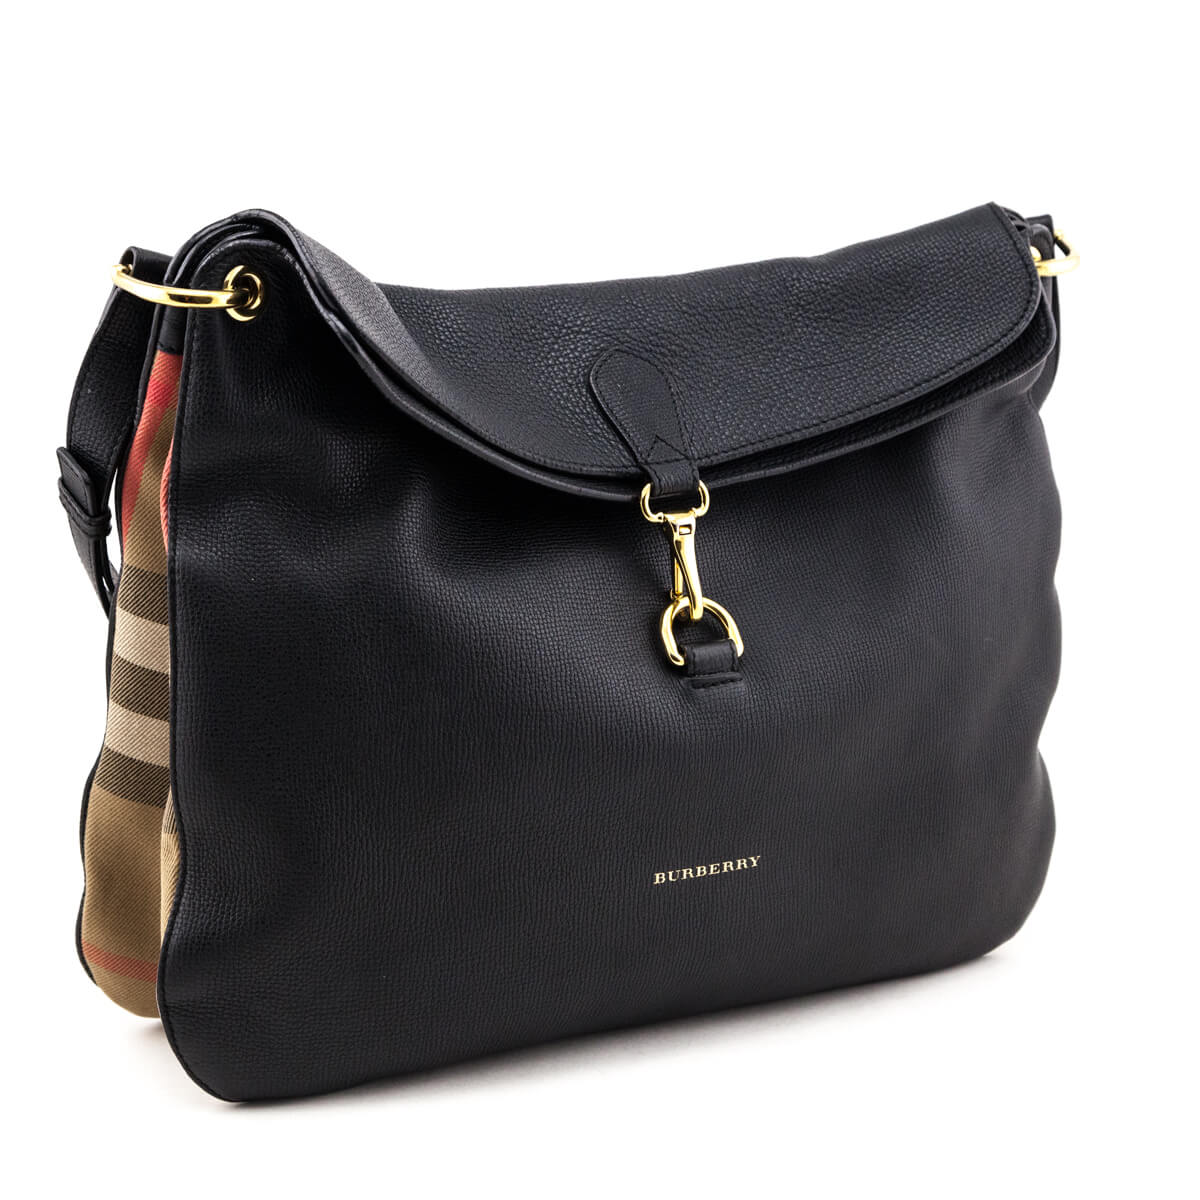 Burberry Black Leather & Check Cornwall Hobo Bag - Love that Bag etc - Preowned Authentic Designer Handbags & Preloved Fashions